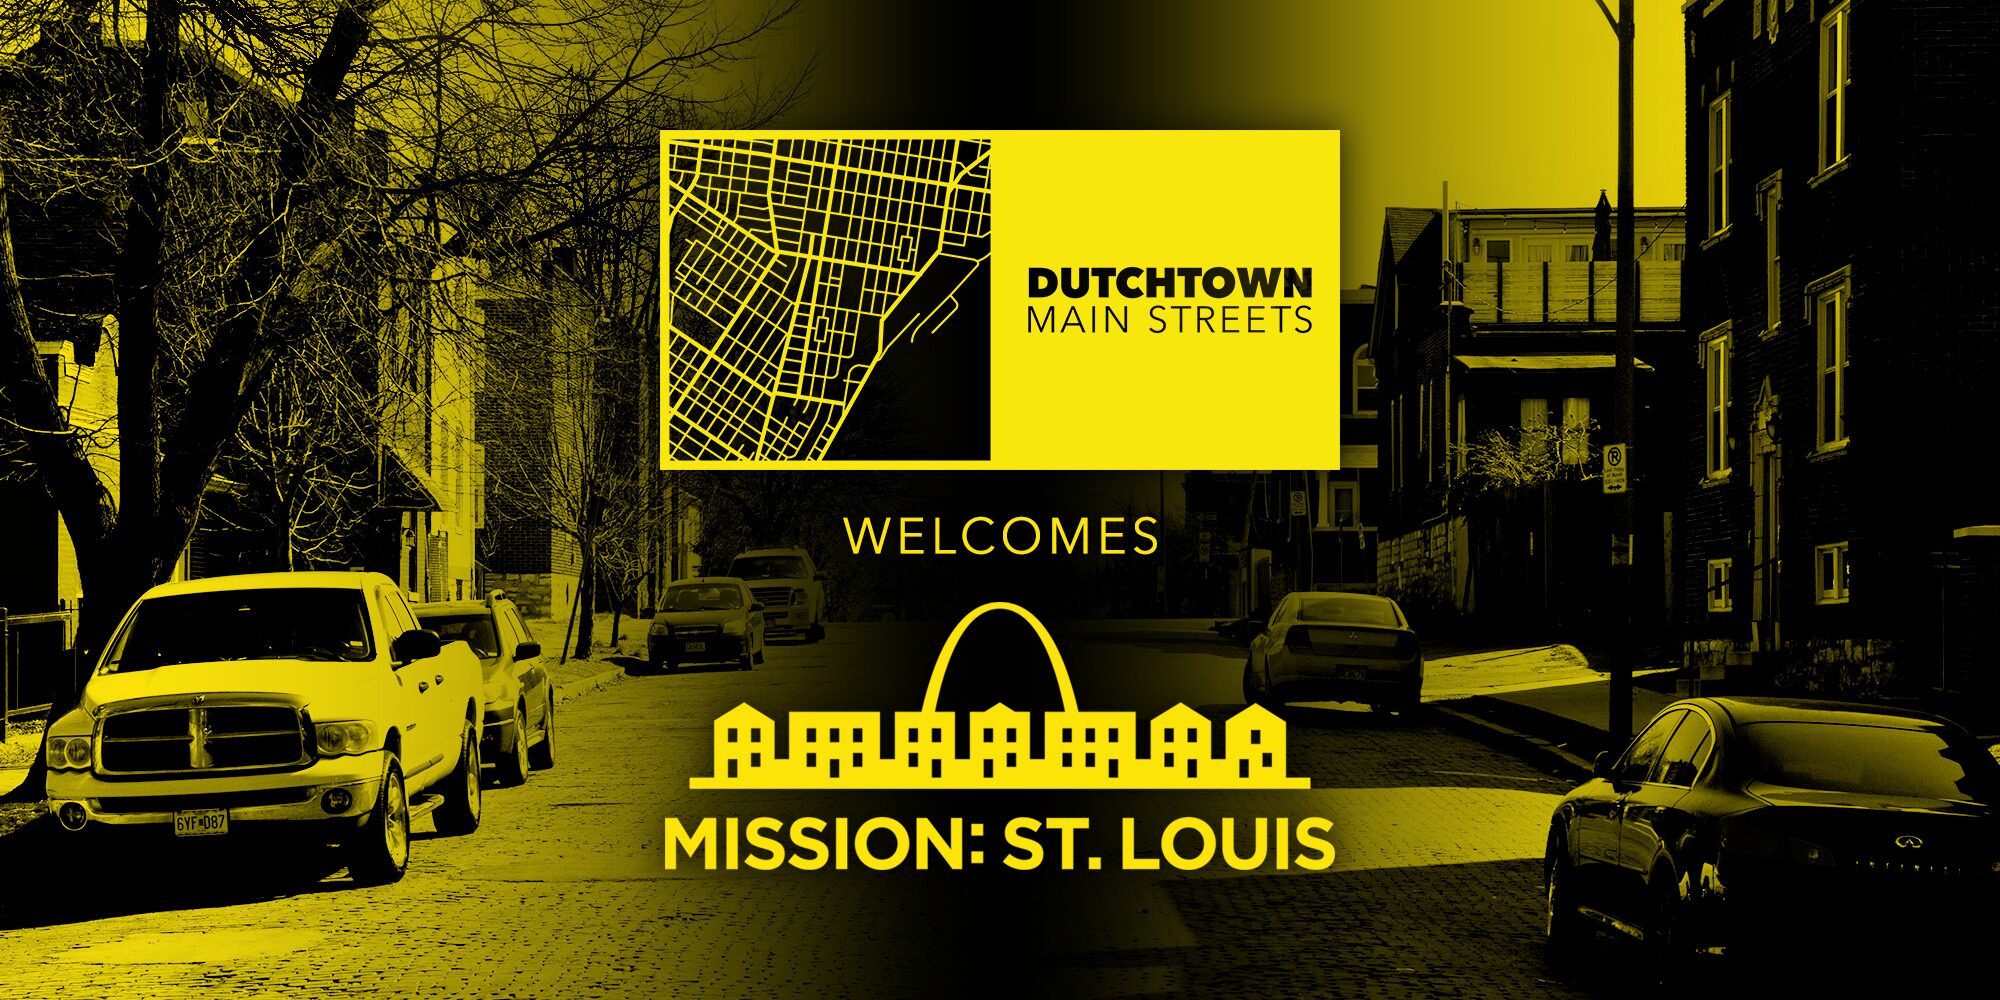 Dutchtown Main Streets Welcomes Mission: St. Louis